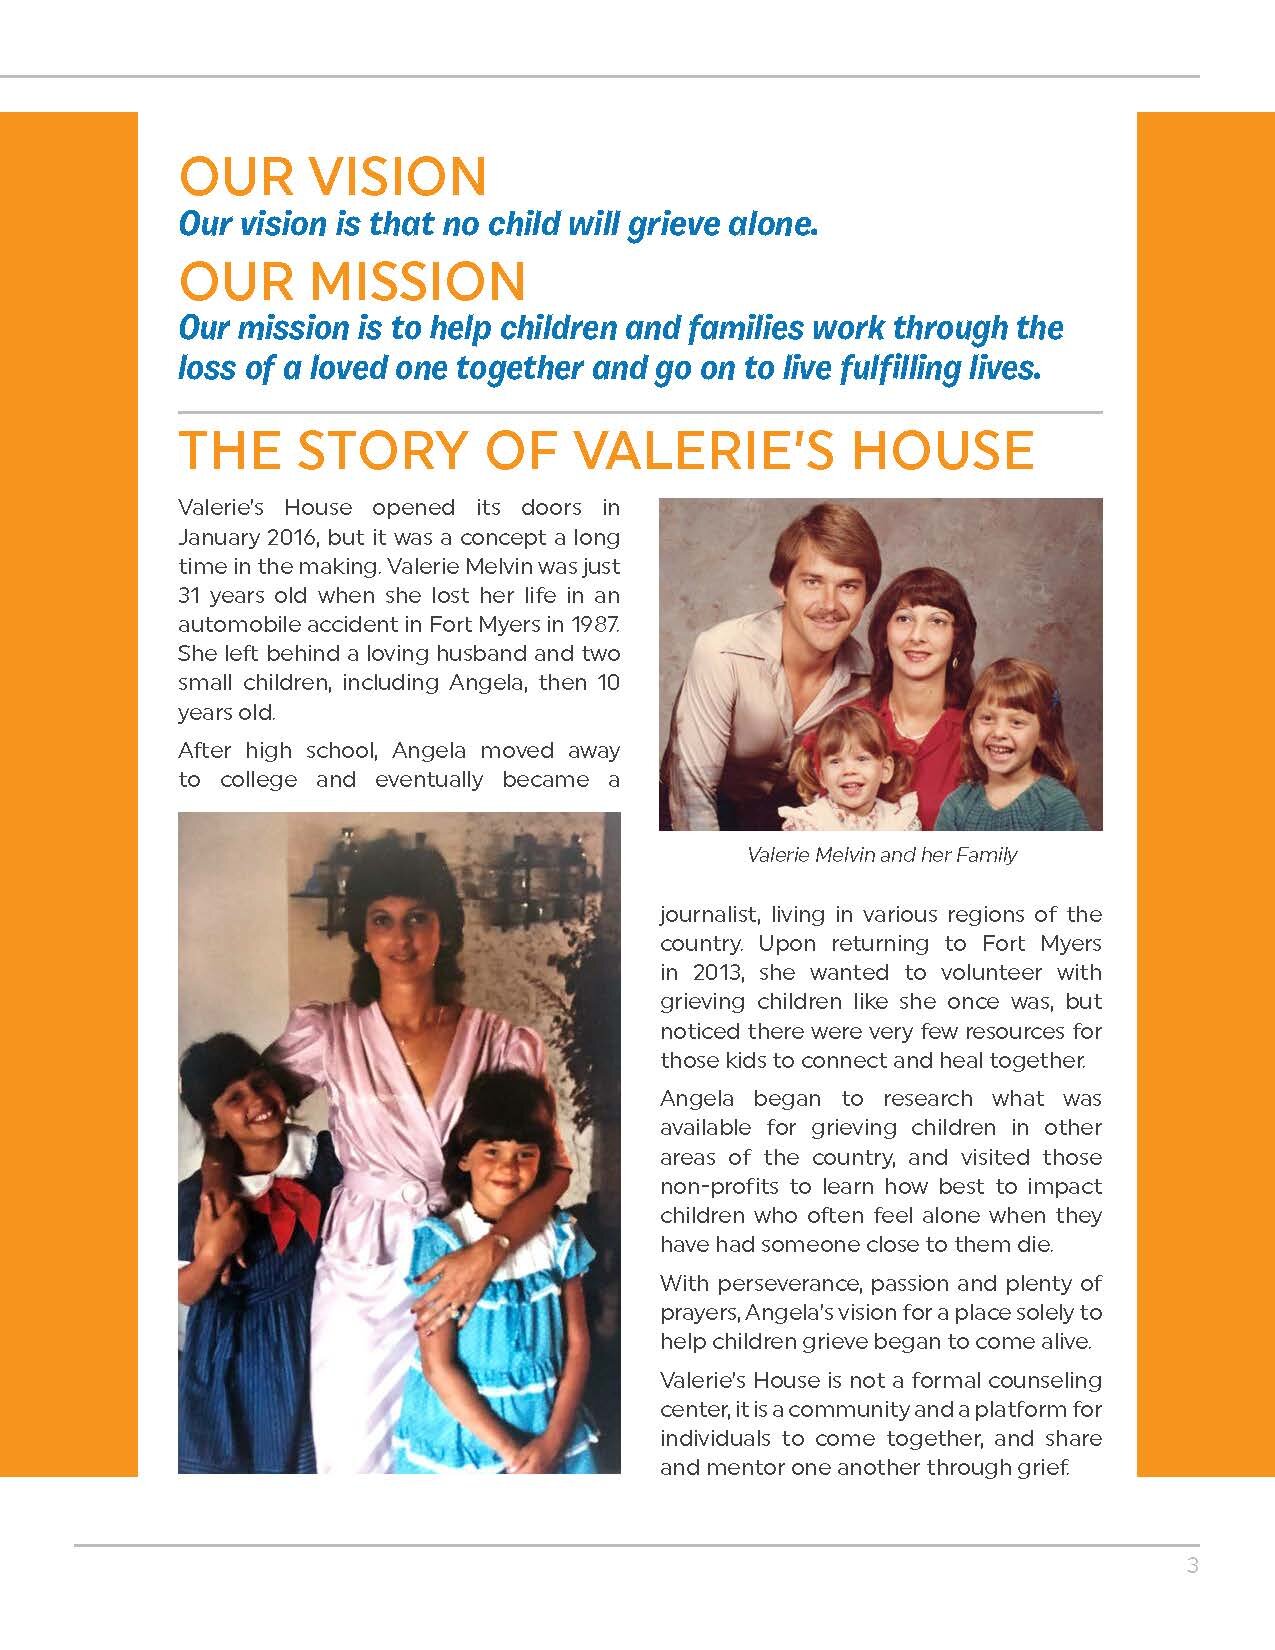 NEW-VH-AnnualReport-8.5x11-SinglePages-WEB_Page_03.jpg